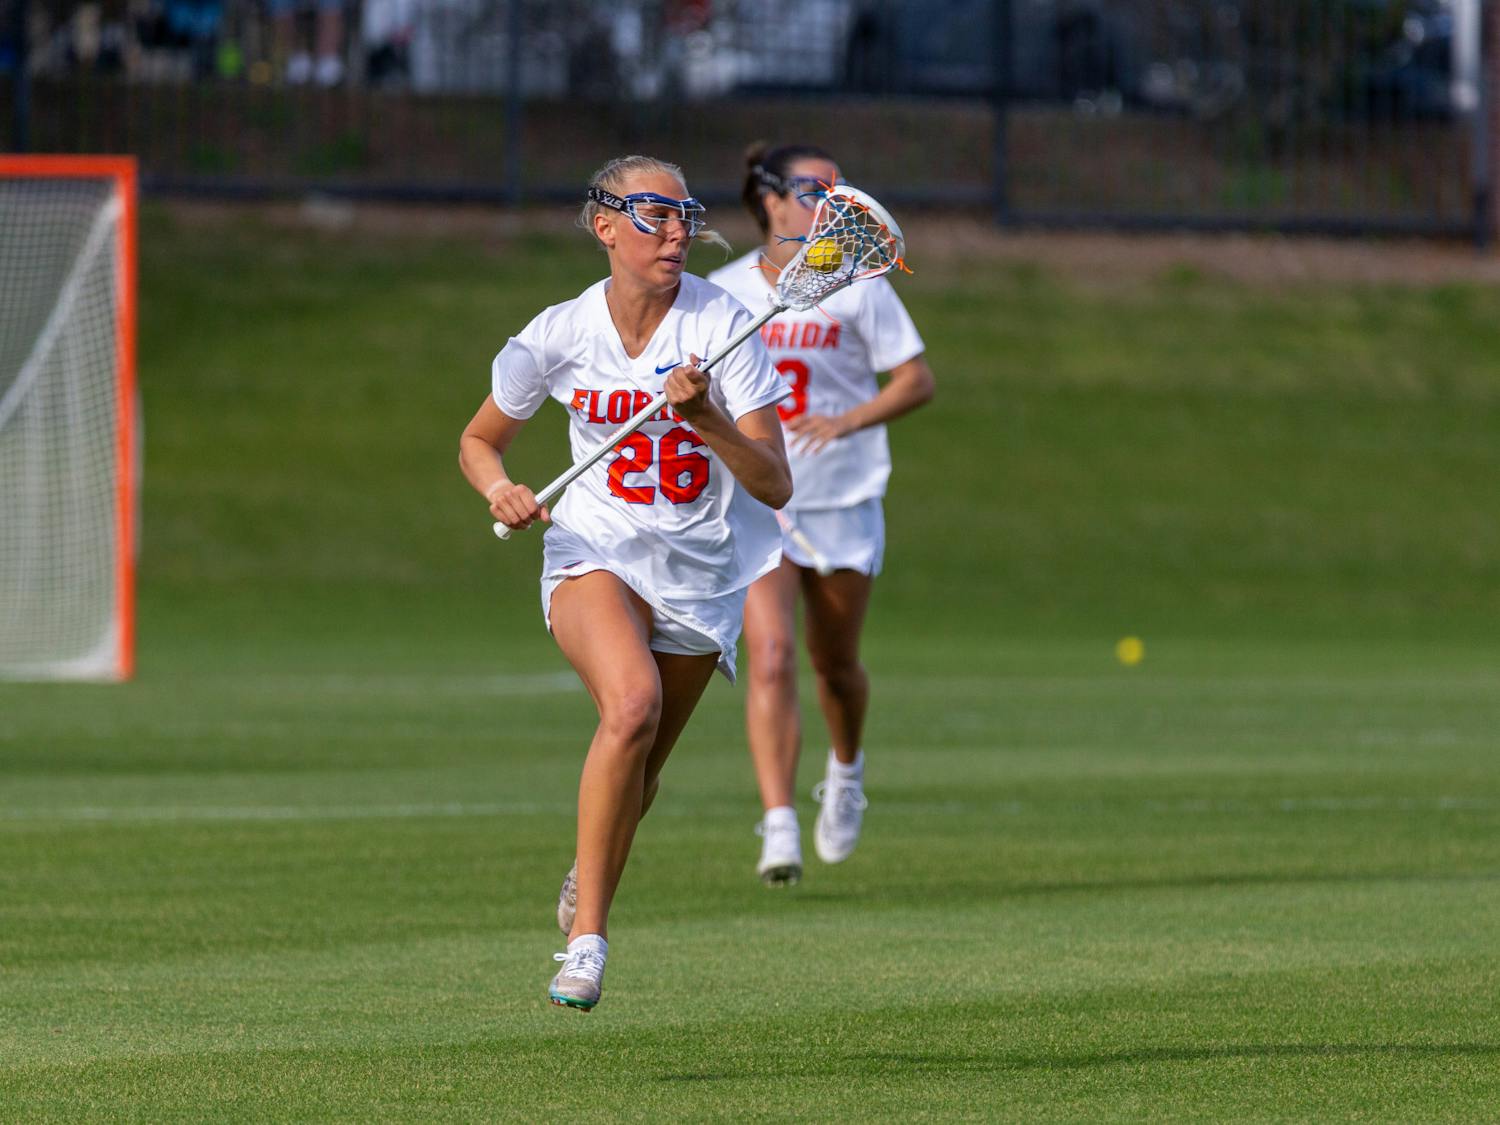 Freshman defender Ashley Dyer runs up the field during the Florida Gators’ Lacrosse game against the Jacksonville Dolphins on Wednesday, February 28. Photo by Ryan Friedenberg